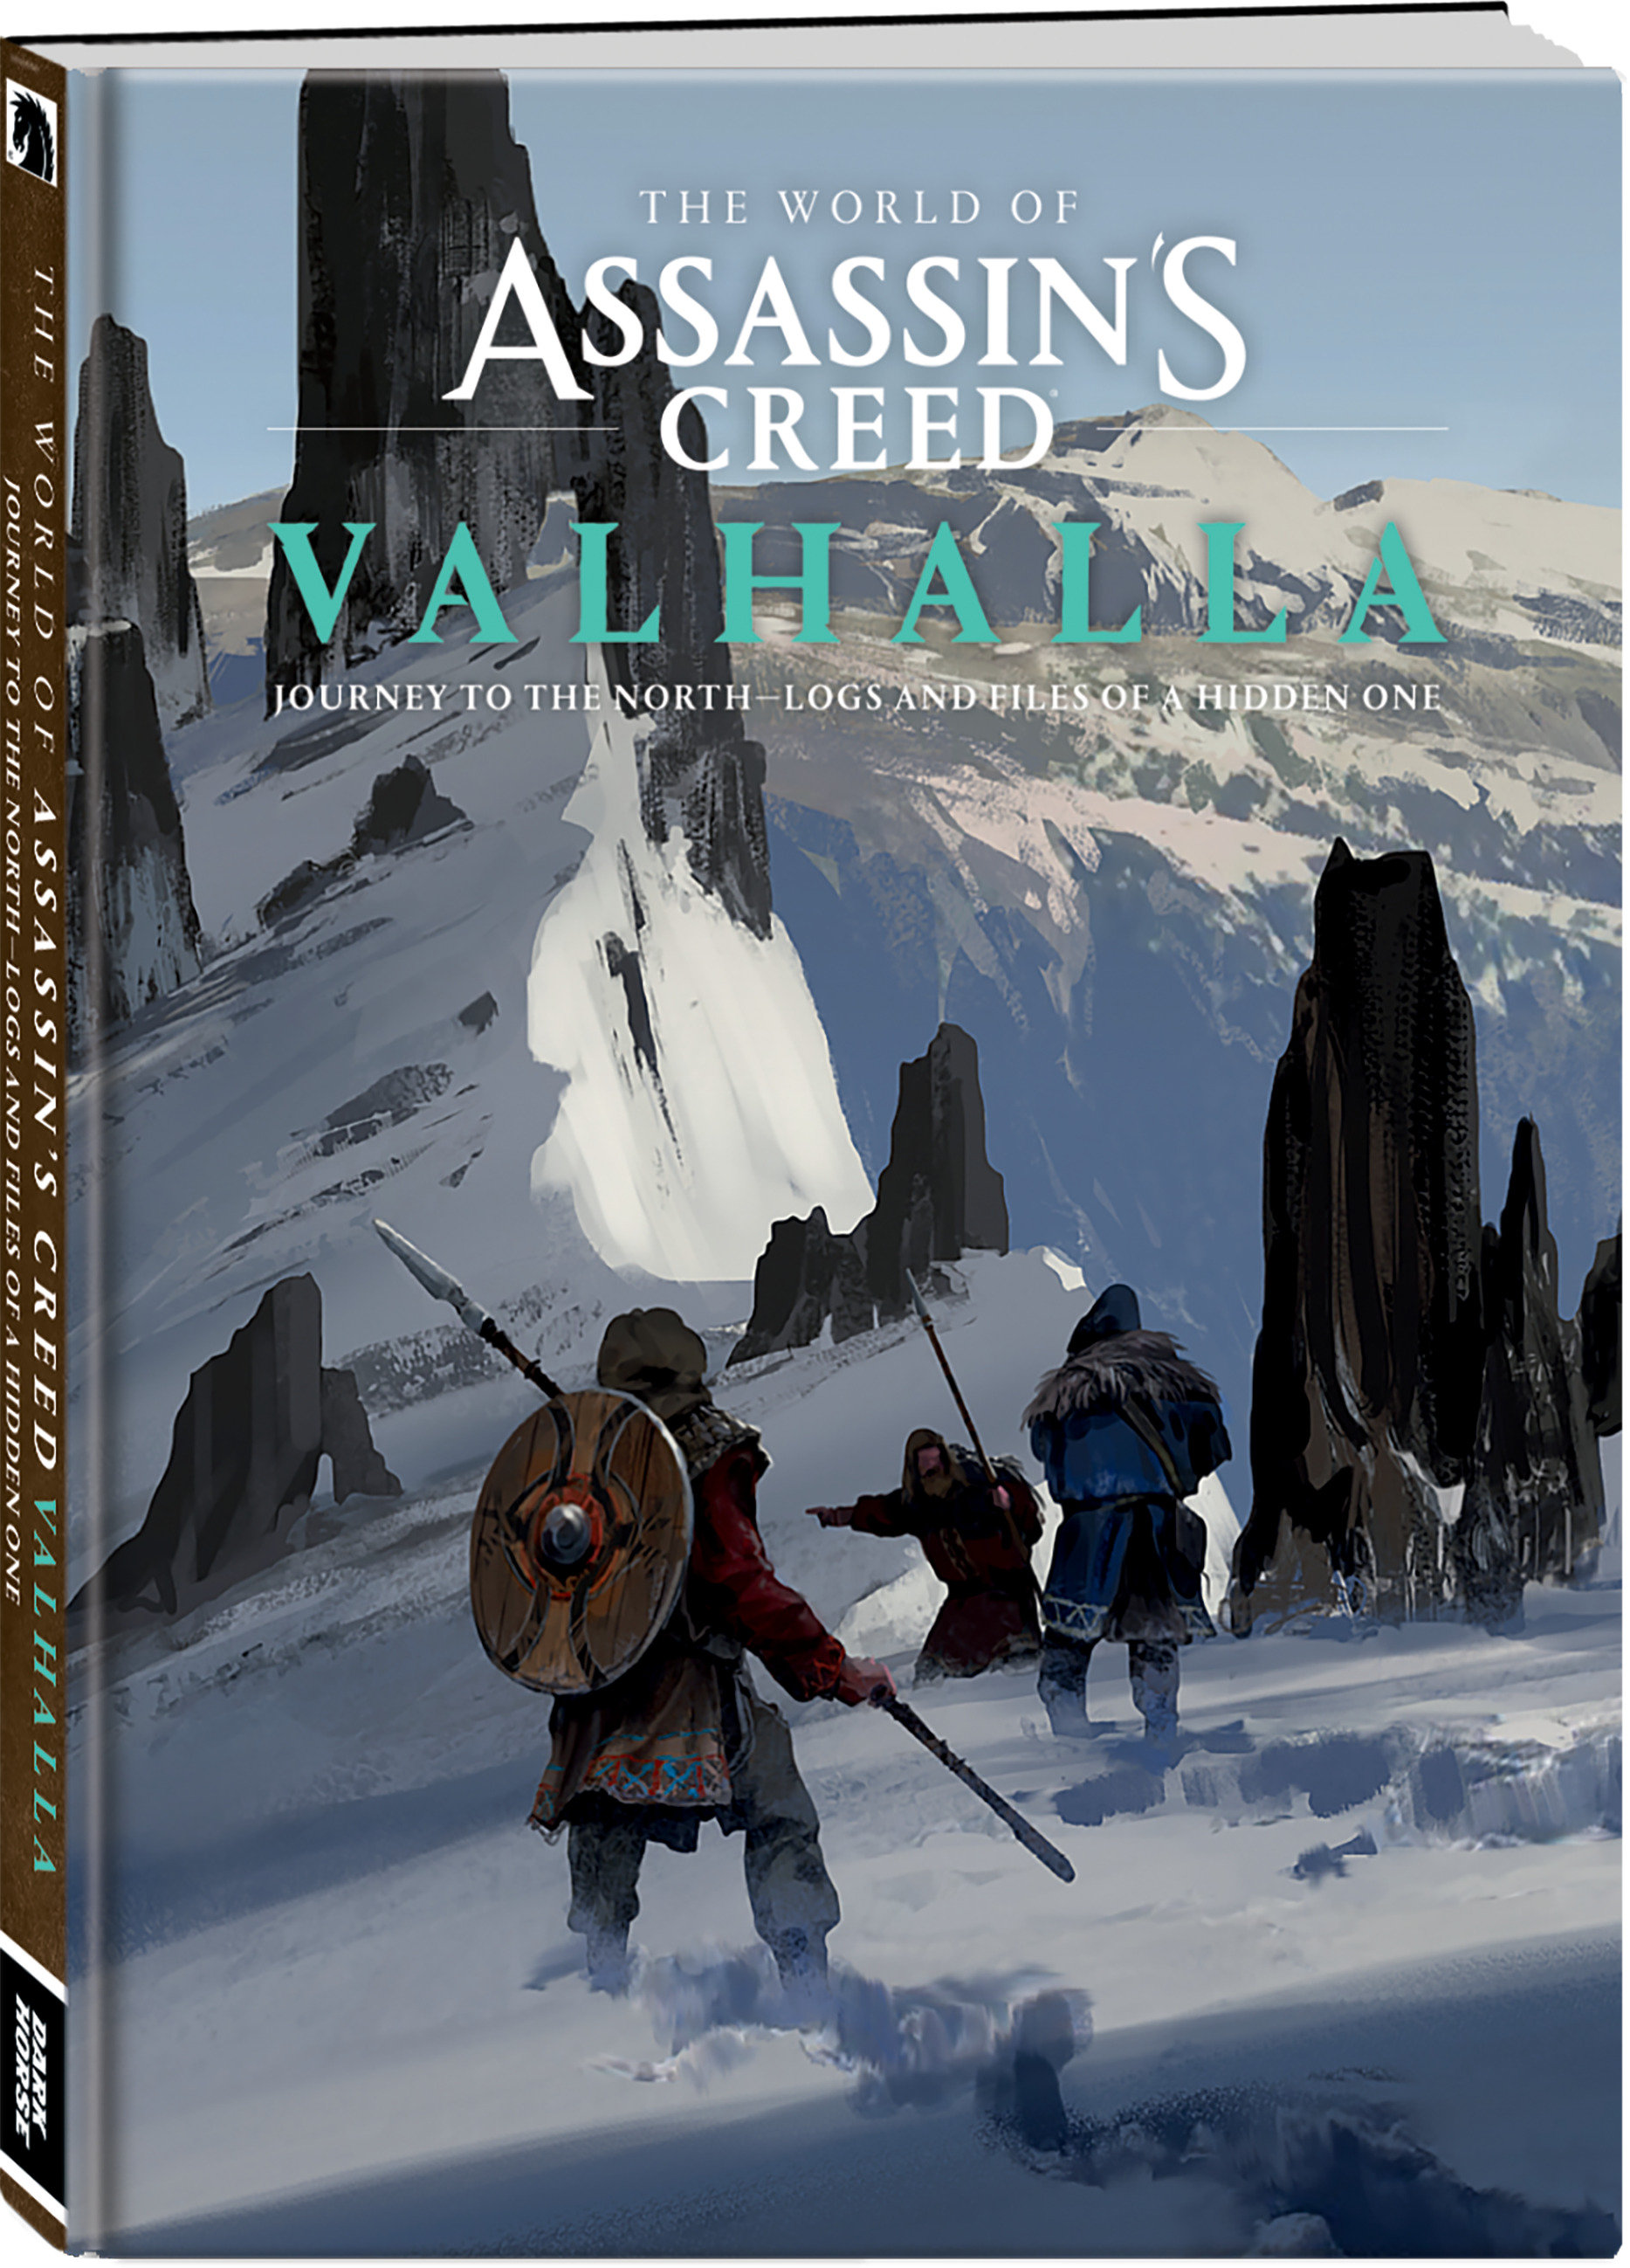 World of Assassins Creed Valhalla Logs of Hidden One Hardcover